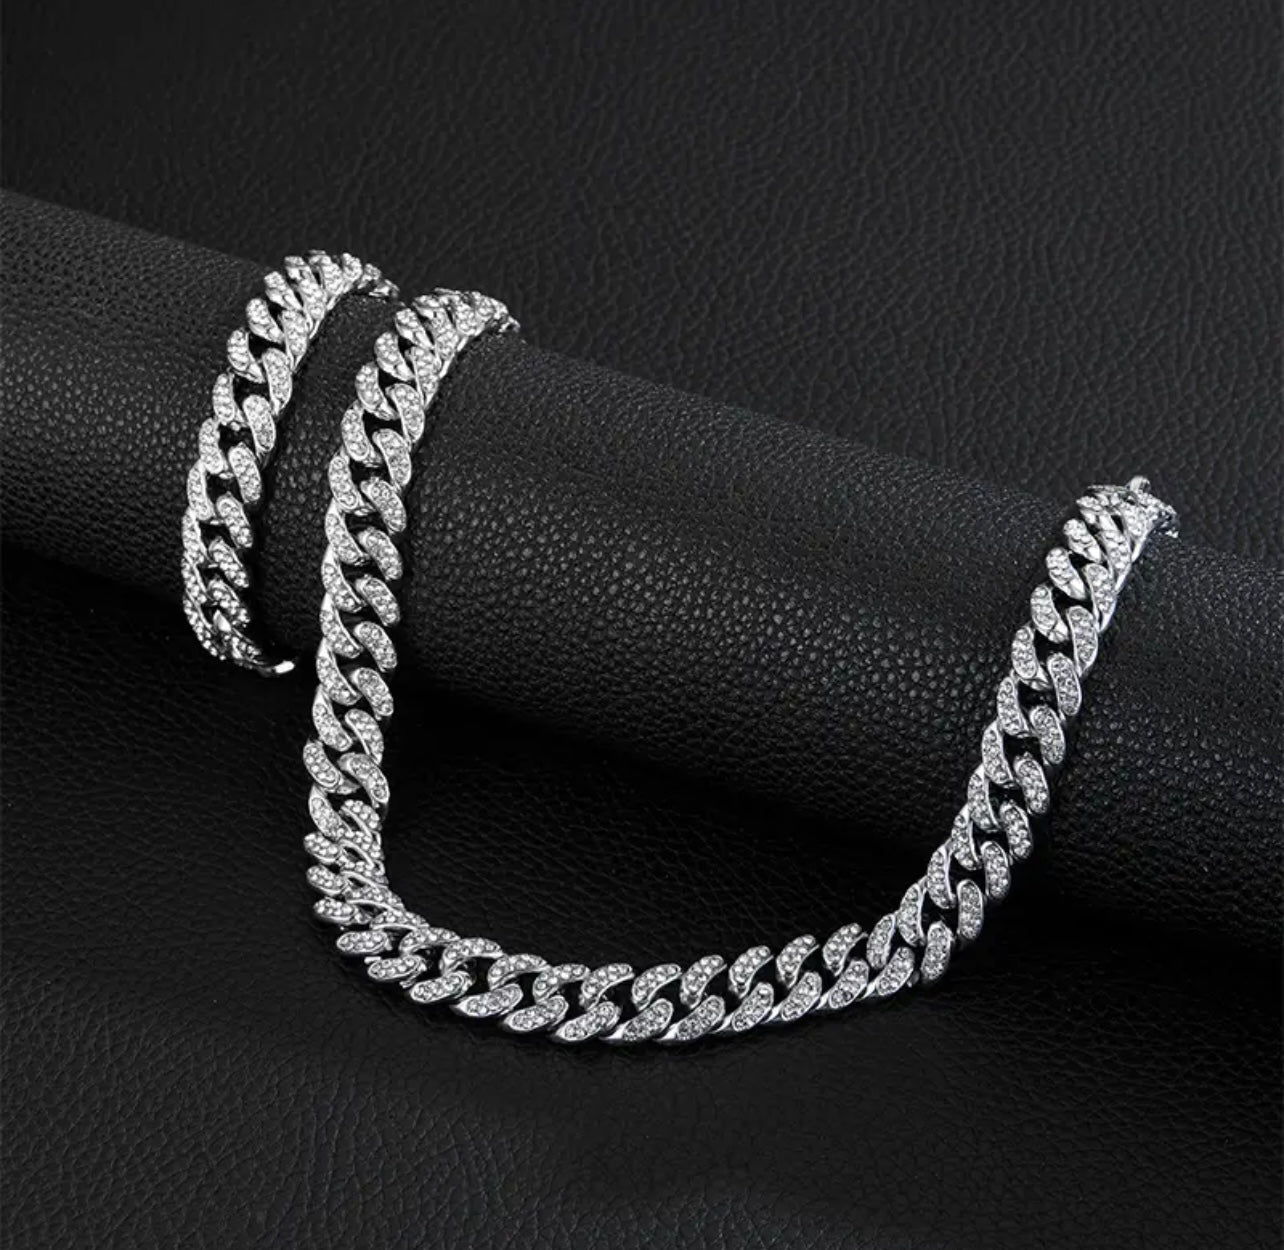 silver iced out neckalce chain price in Pakistan